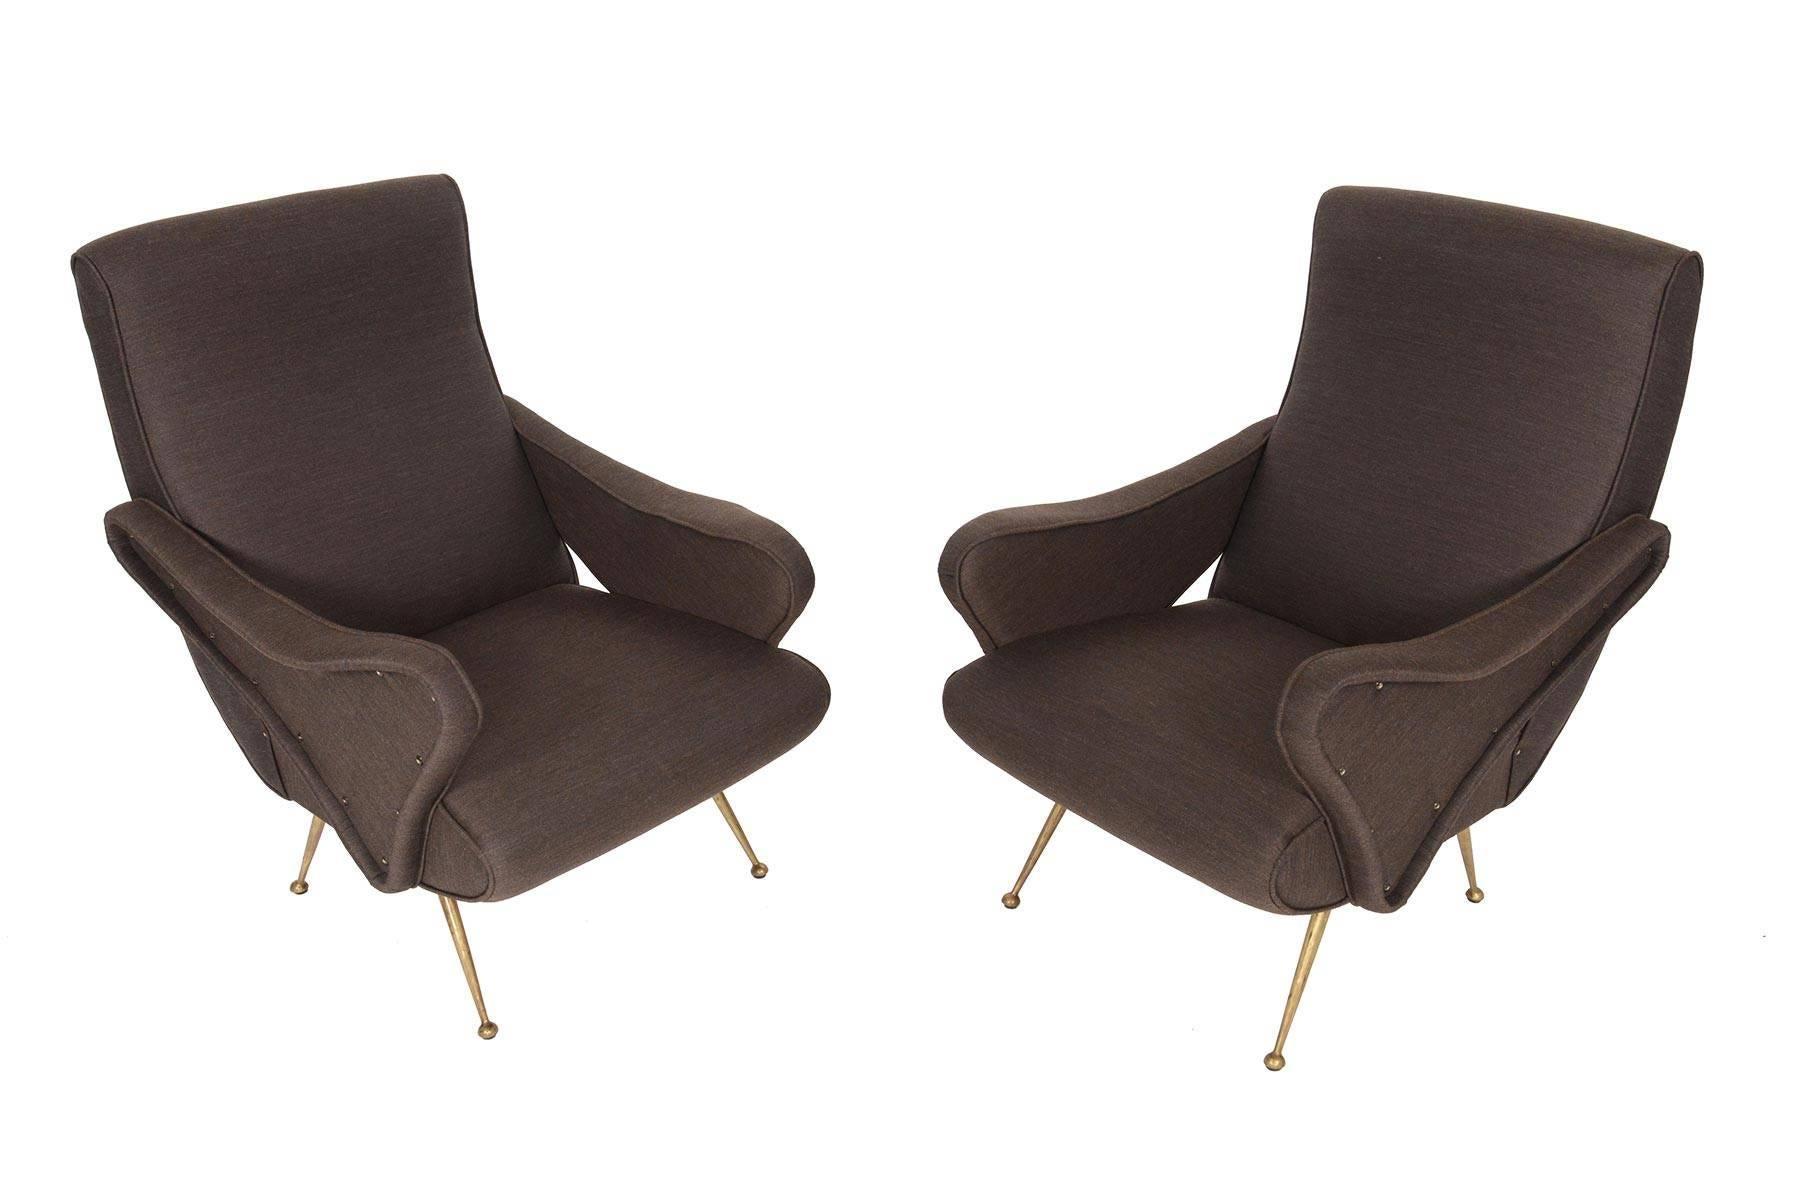 This pair of Italian modern lounge chairs was designed in the 1960s in the style of Marco Zanuso. With lines that reflect an interest in futurism, speed, and technology, the form of this chair is a true modern design. The organic cushions are